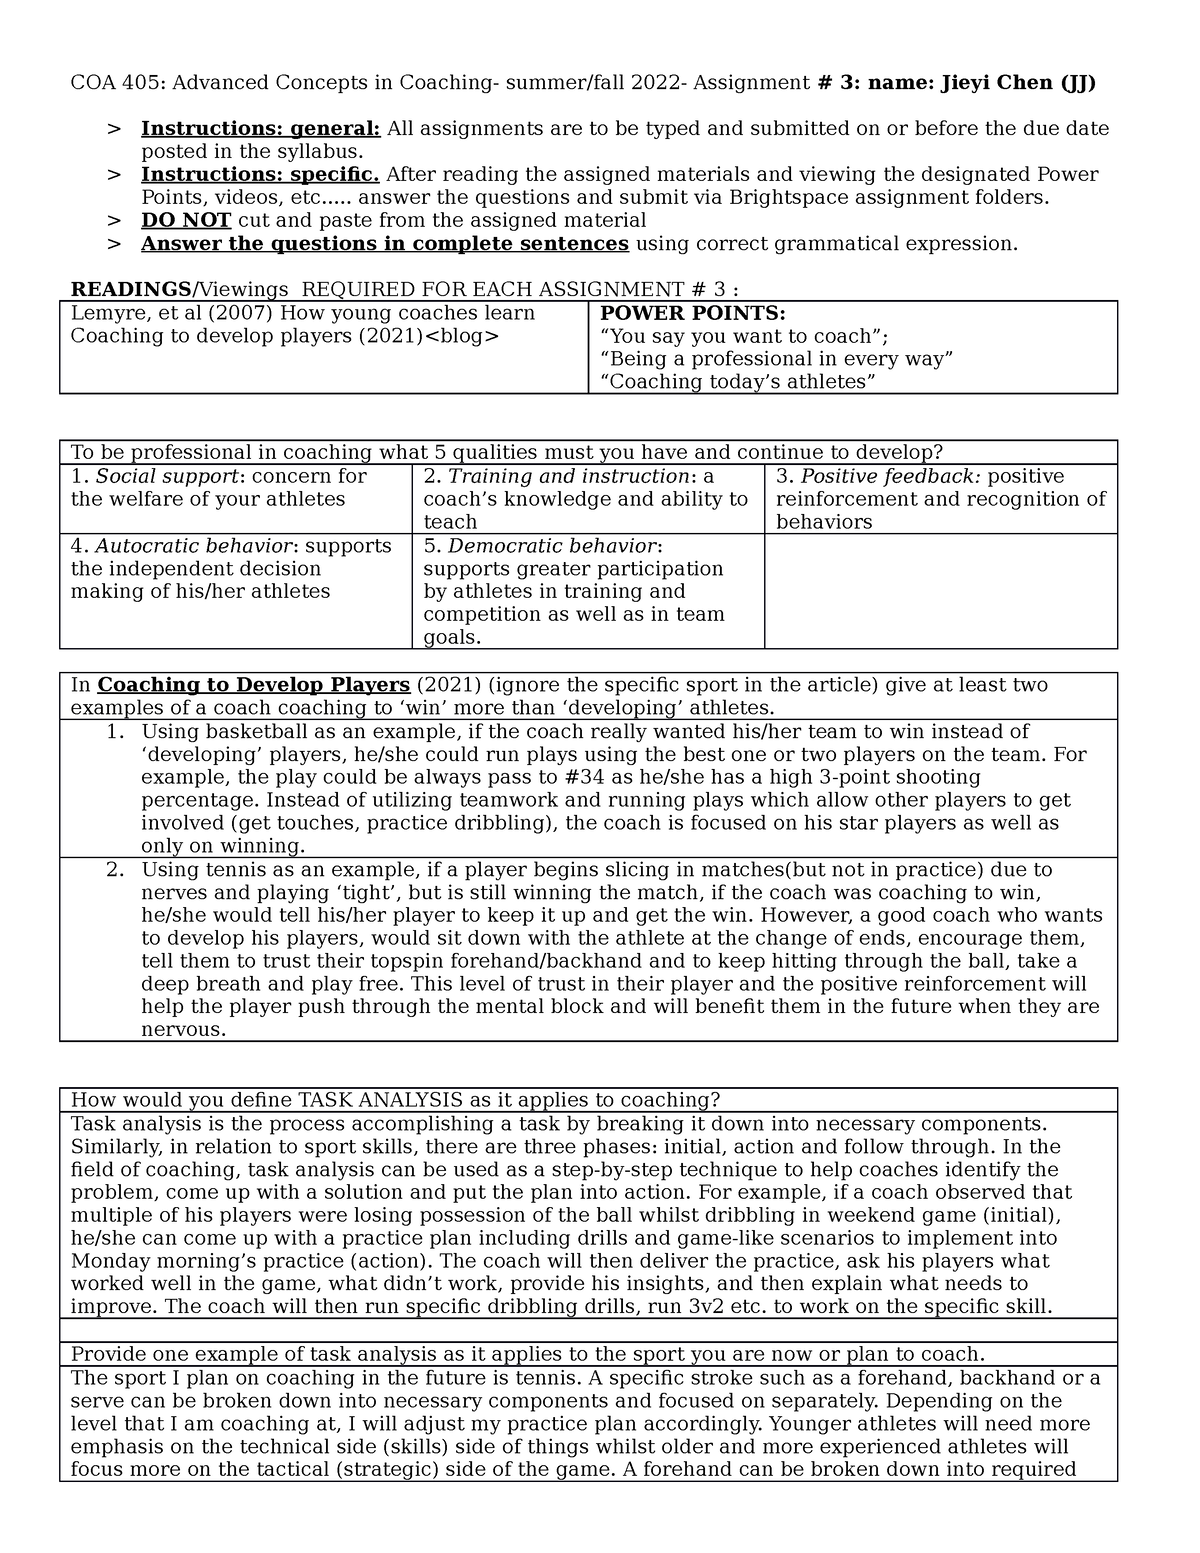 405 assignment 2022 pdf download